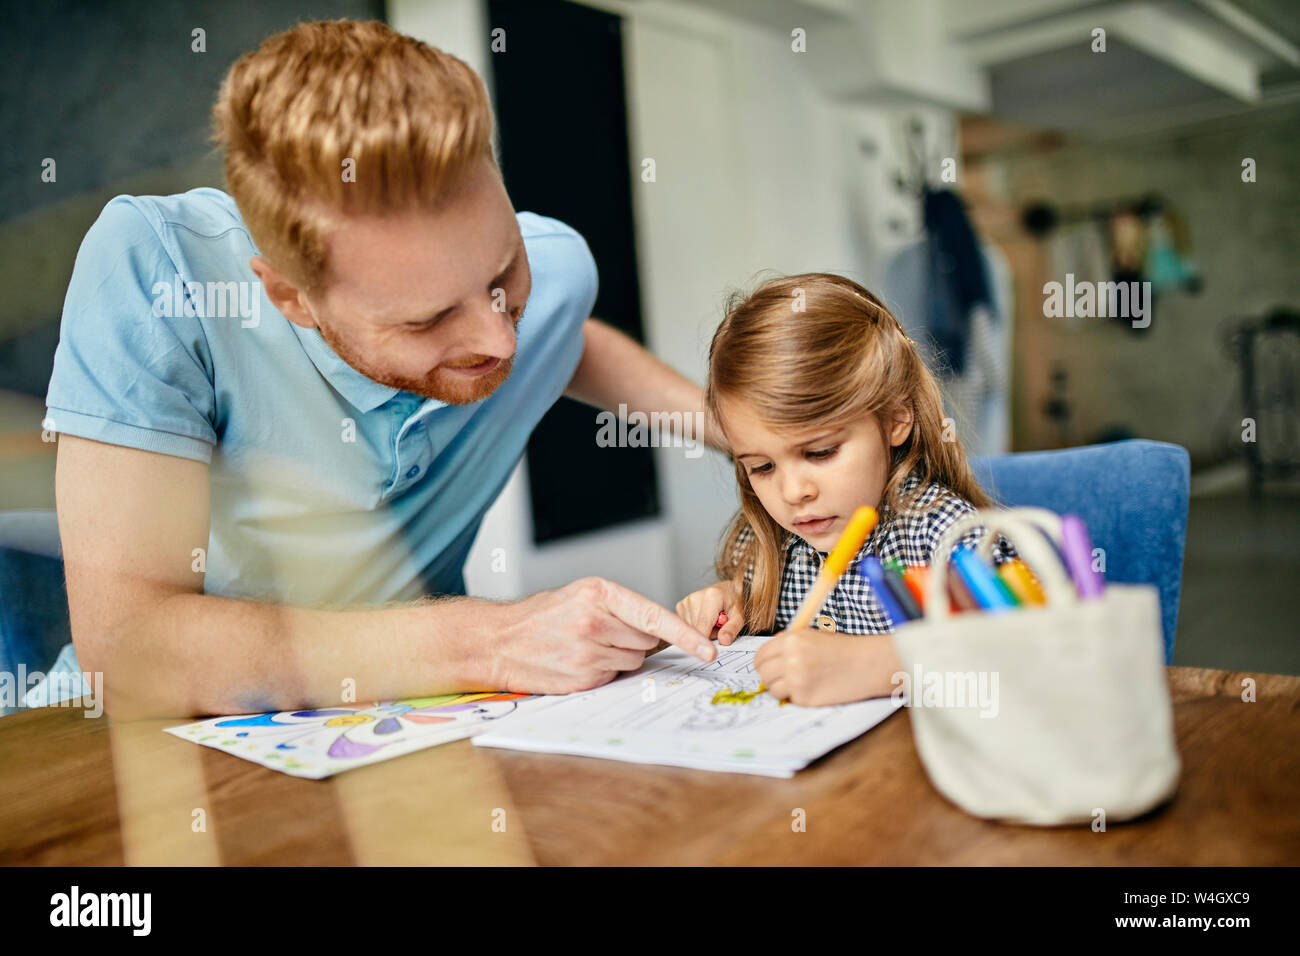 Father and daughter sitting at table, painting colouring book Stock Photo